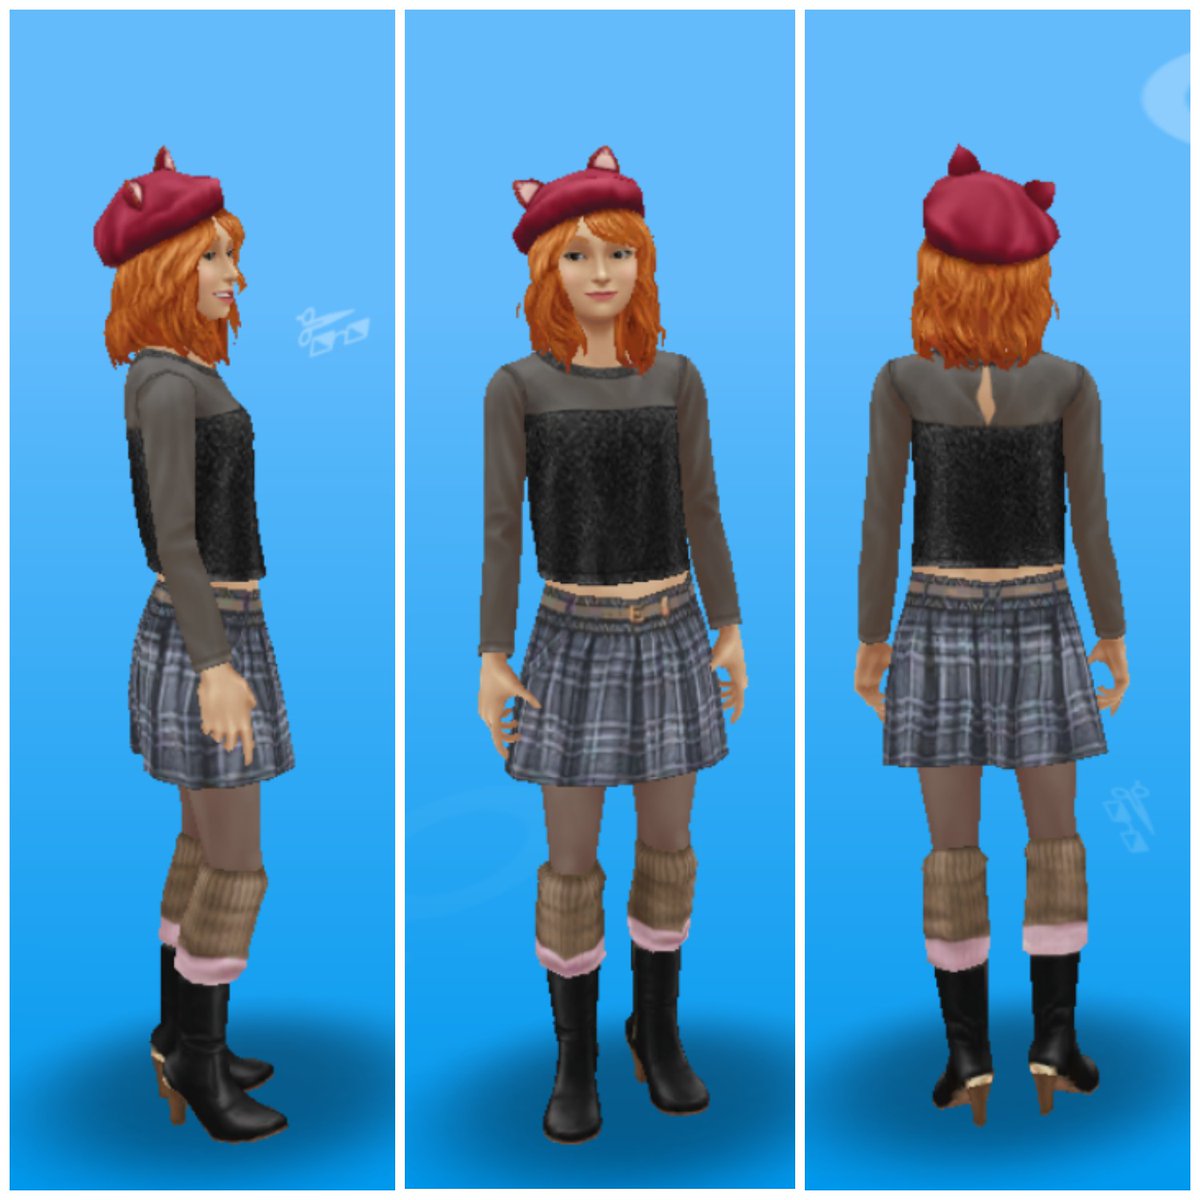 A cool outfit for female teenage sims

#simsfreeplay 
#simsfreeplayea 
#simsfreeplayonlinestore
#simsfreeplayonlinestorepacks #simsfreeplayfashion 
#simsfreeplayteens 
#simsfreeplayteenager 
#simsfreeplayteenidol 
#simsmodels